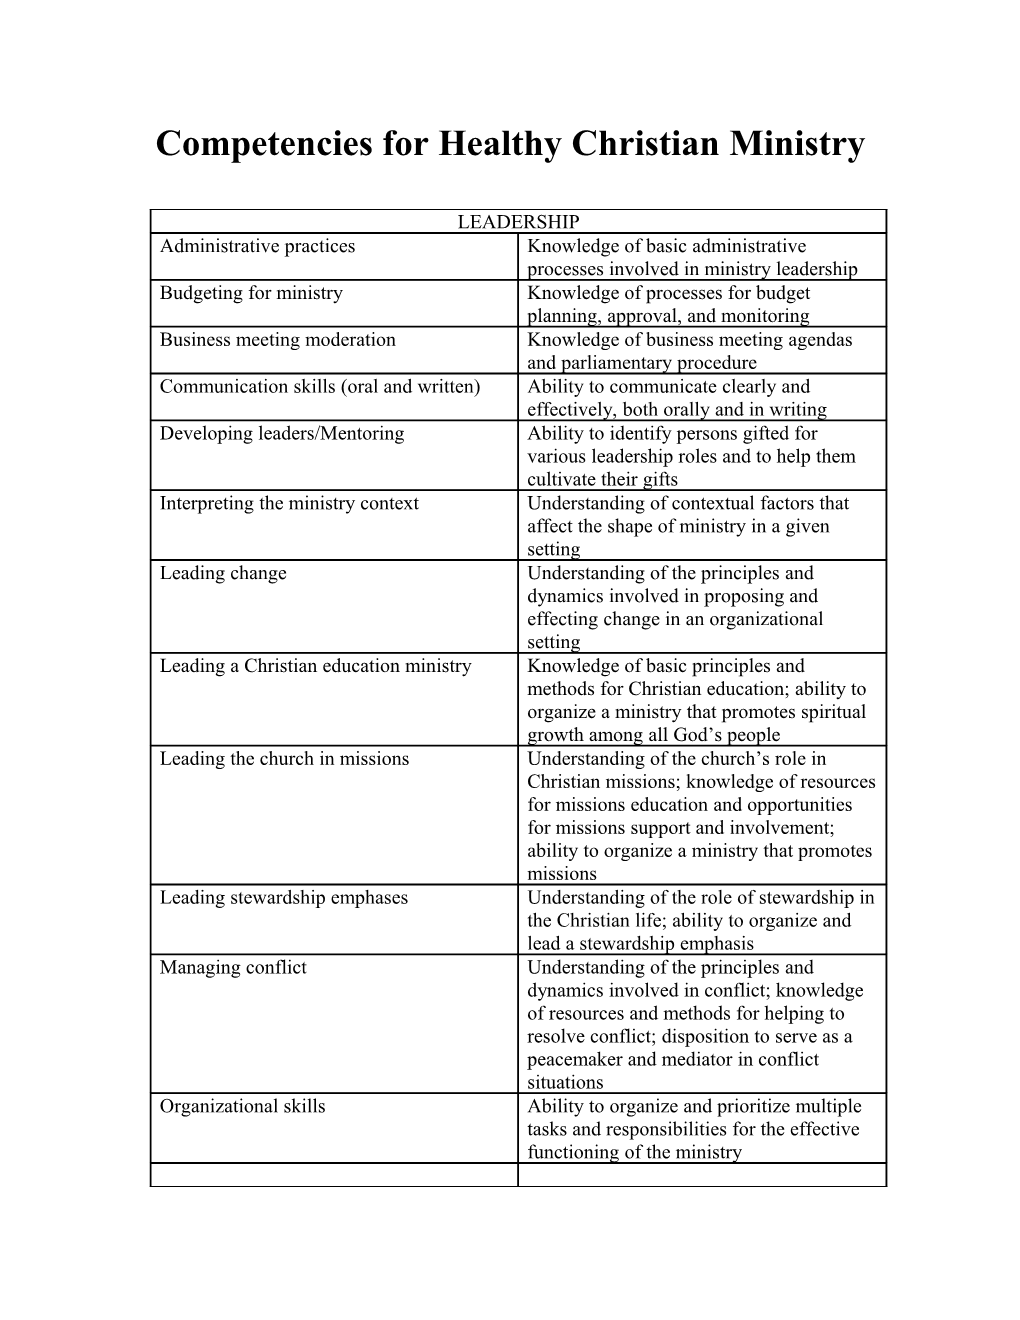 Competencies for Healthy Christian Ministry